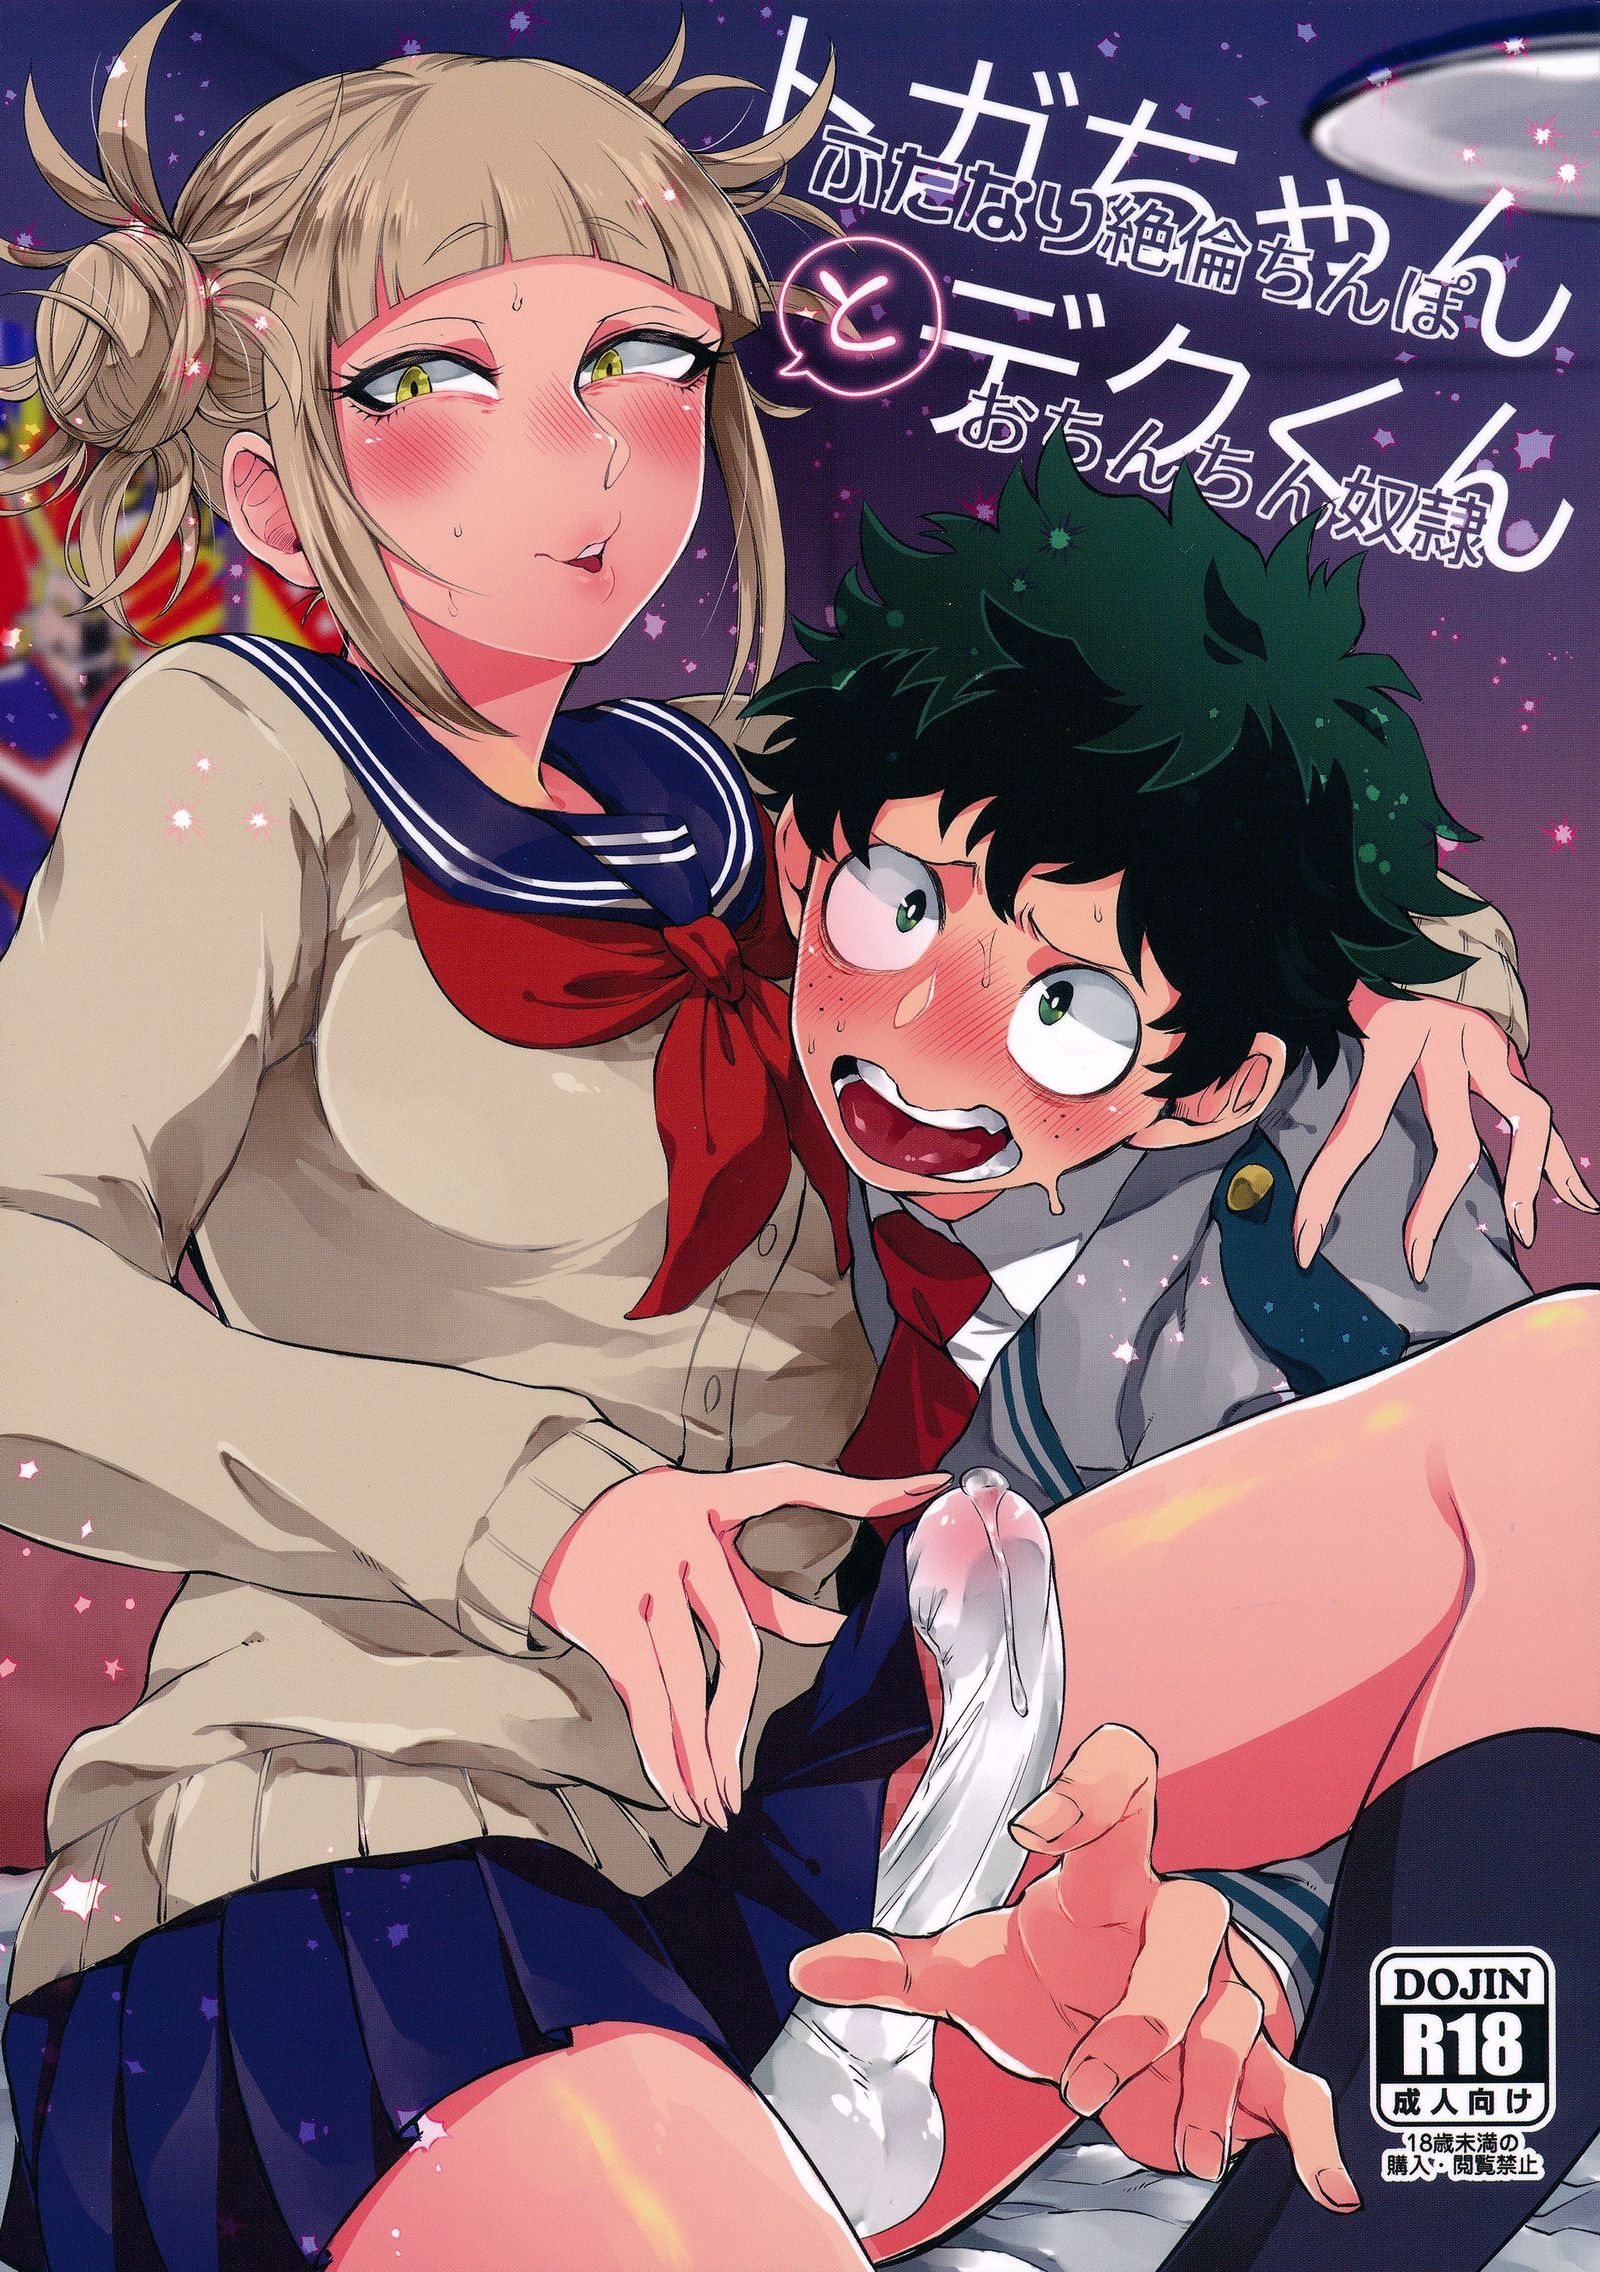 himiko toga - sorted by number of objects - Free Hentai